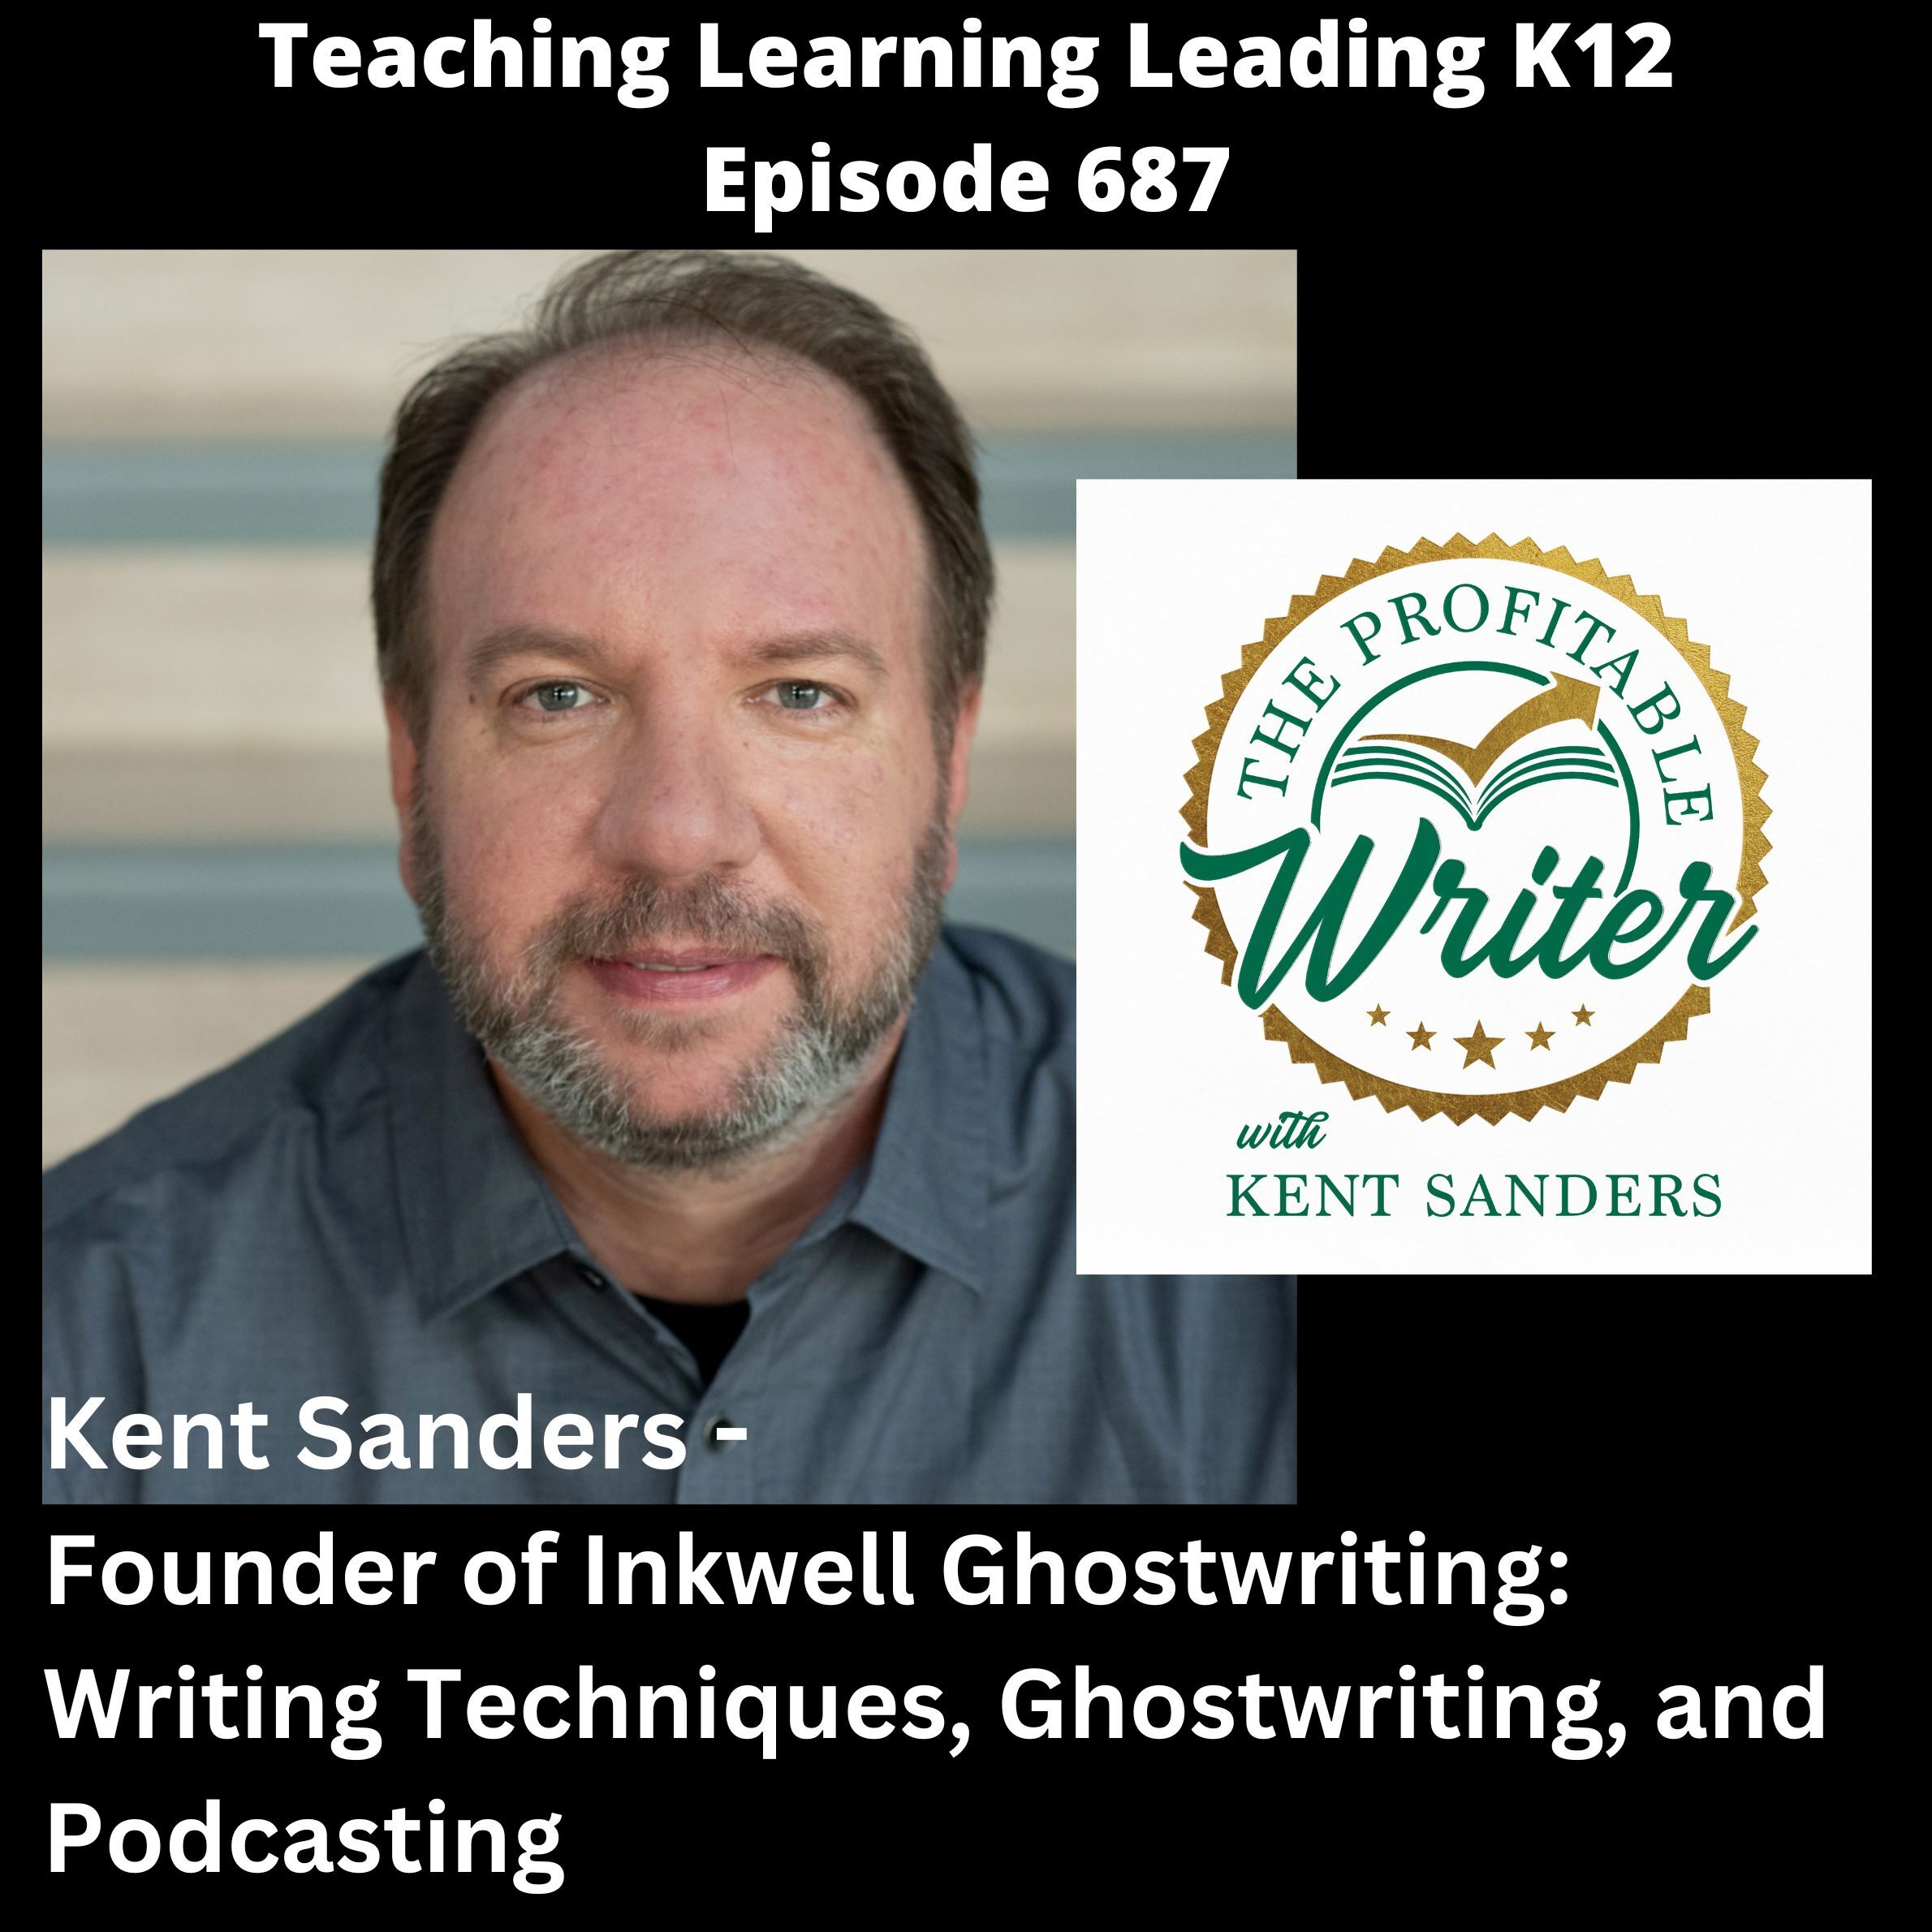 Kent Sanders - Founder of Inkwell Ghostwriting: Writing Techniques, Ghostwriting, & Podcasting - 687